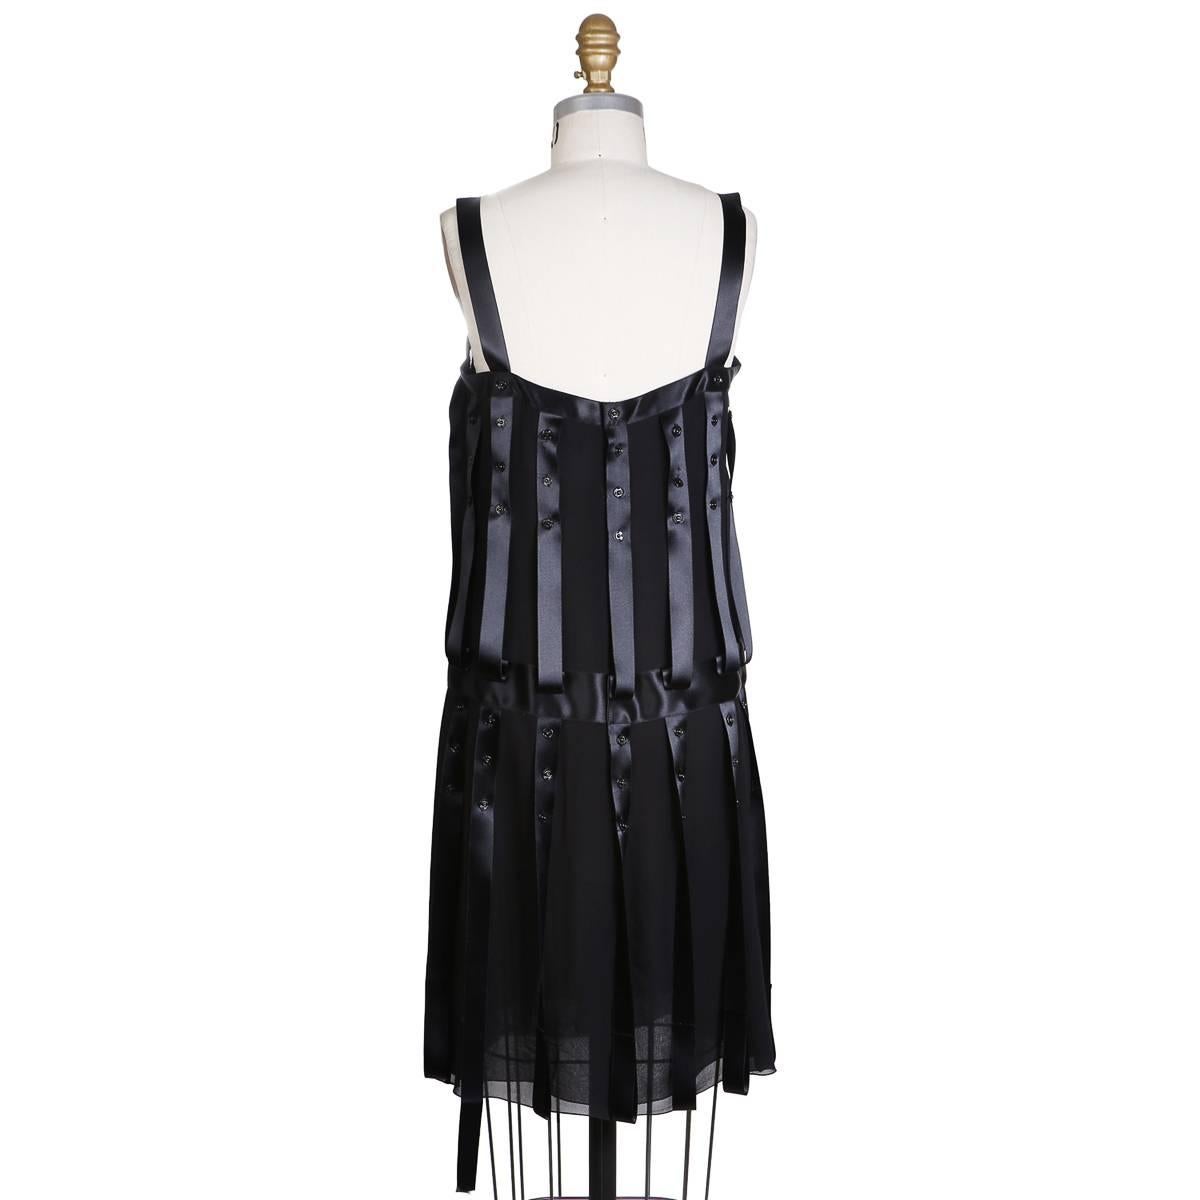 Shift dress from Chanel for the F/W RTW 2003 collection
Black satin trims with snap details
100% silk
Condition: Excellent
Size/Measurements:
Size 38
32